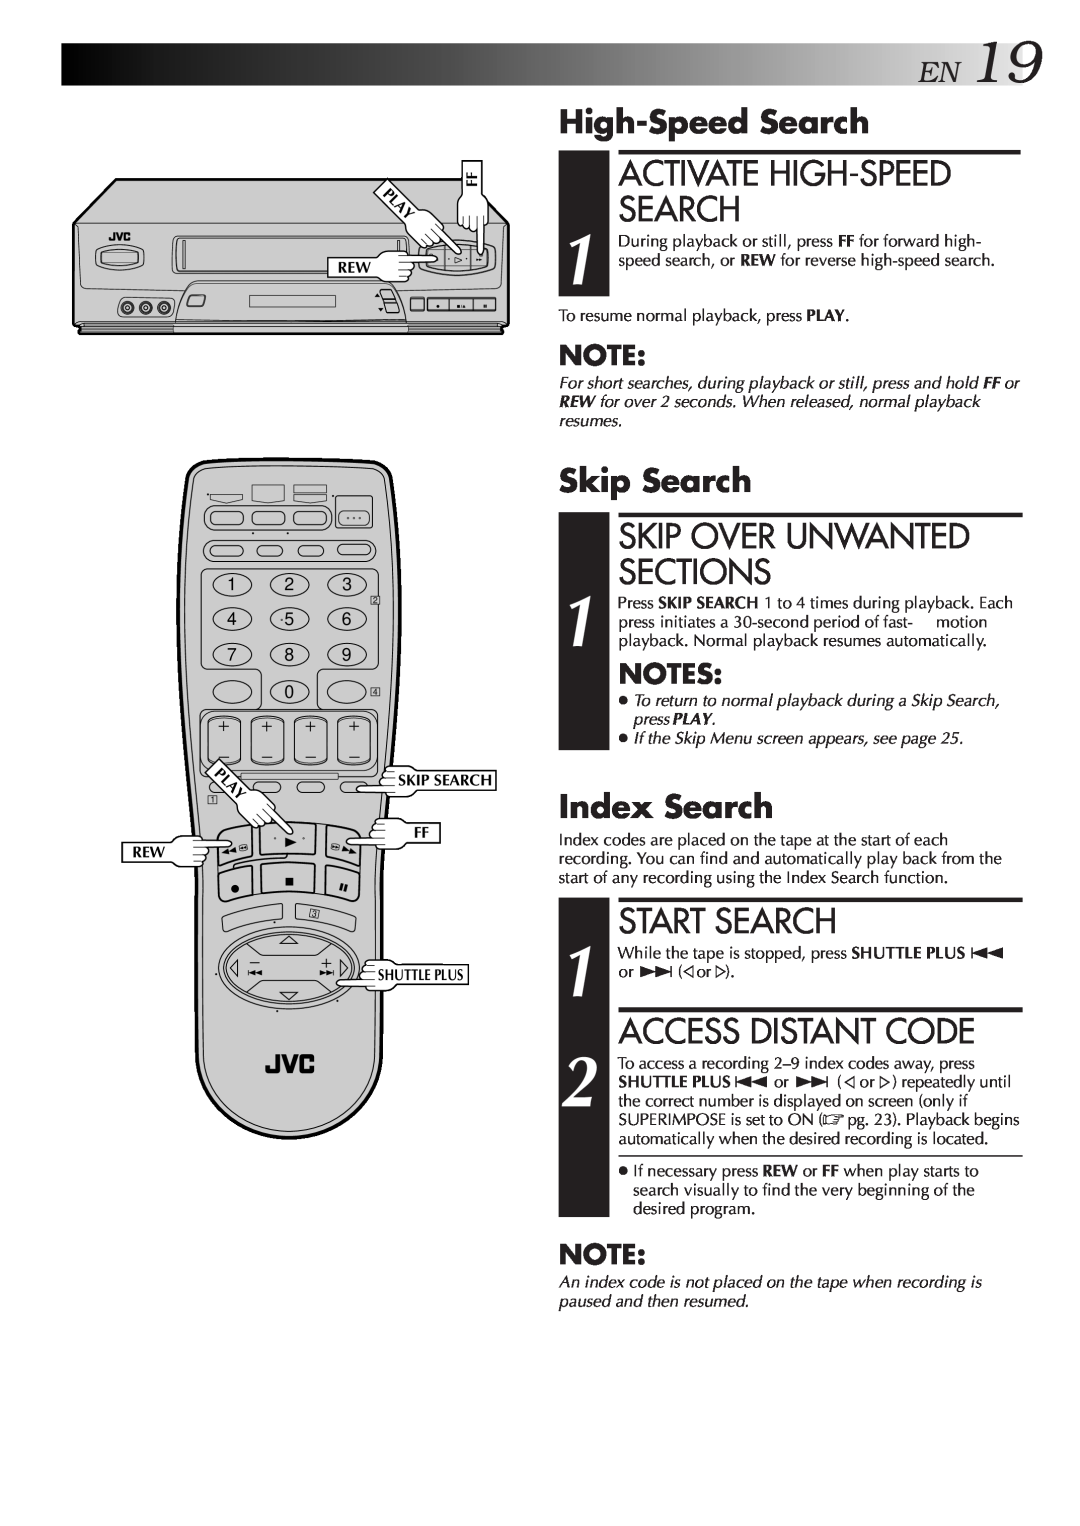 JVC HR-VP453U, HR-VP653U EN19, Activate High-Speed Search, Skip Over Unwanted Sections, Start Search, Access Distant Code 